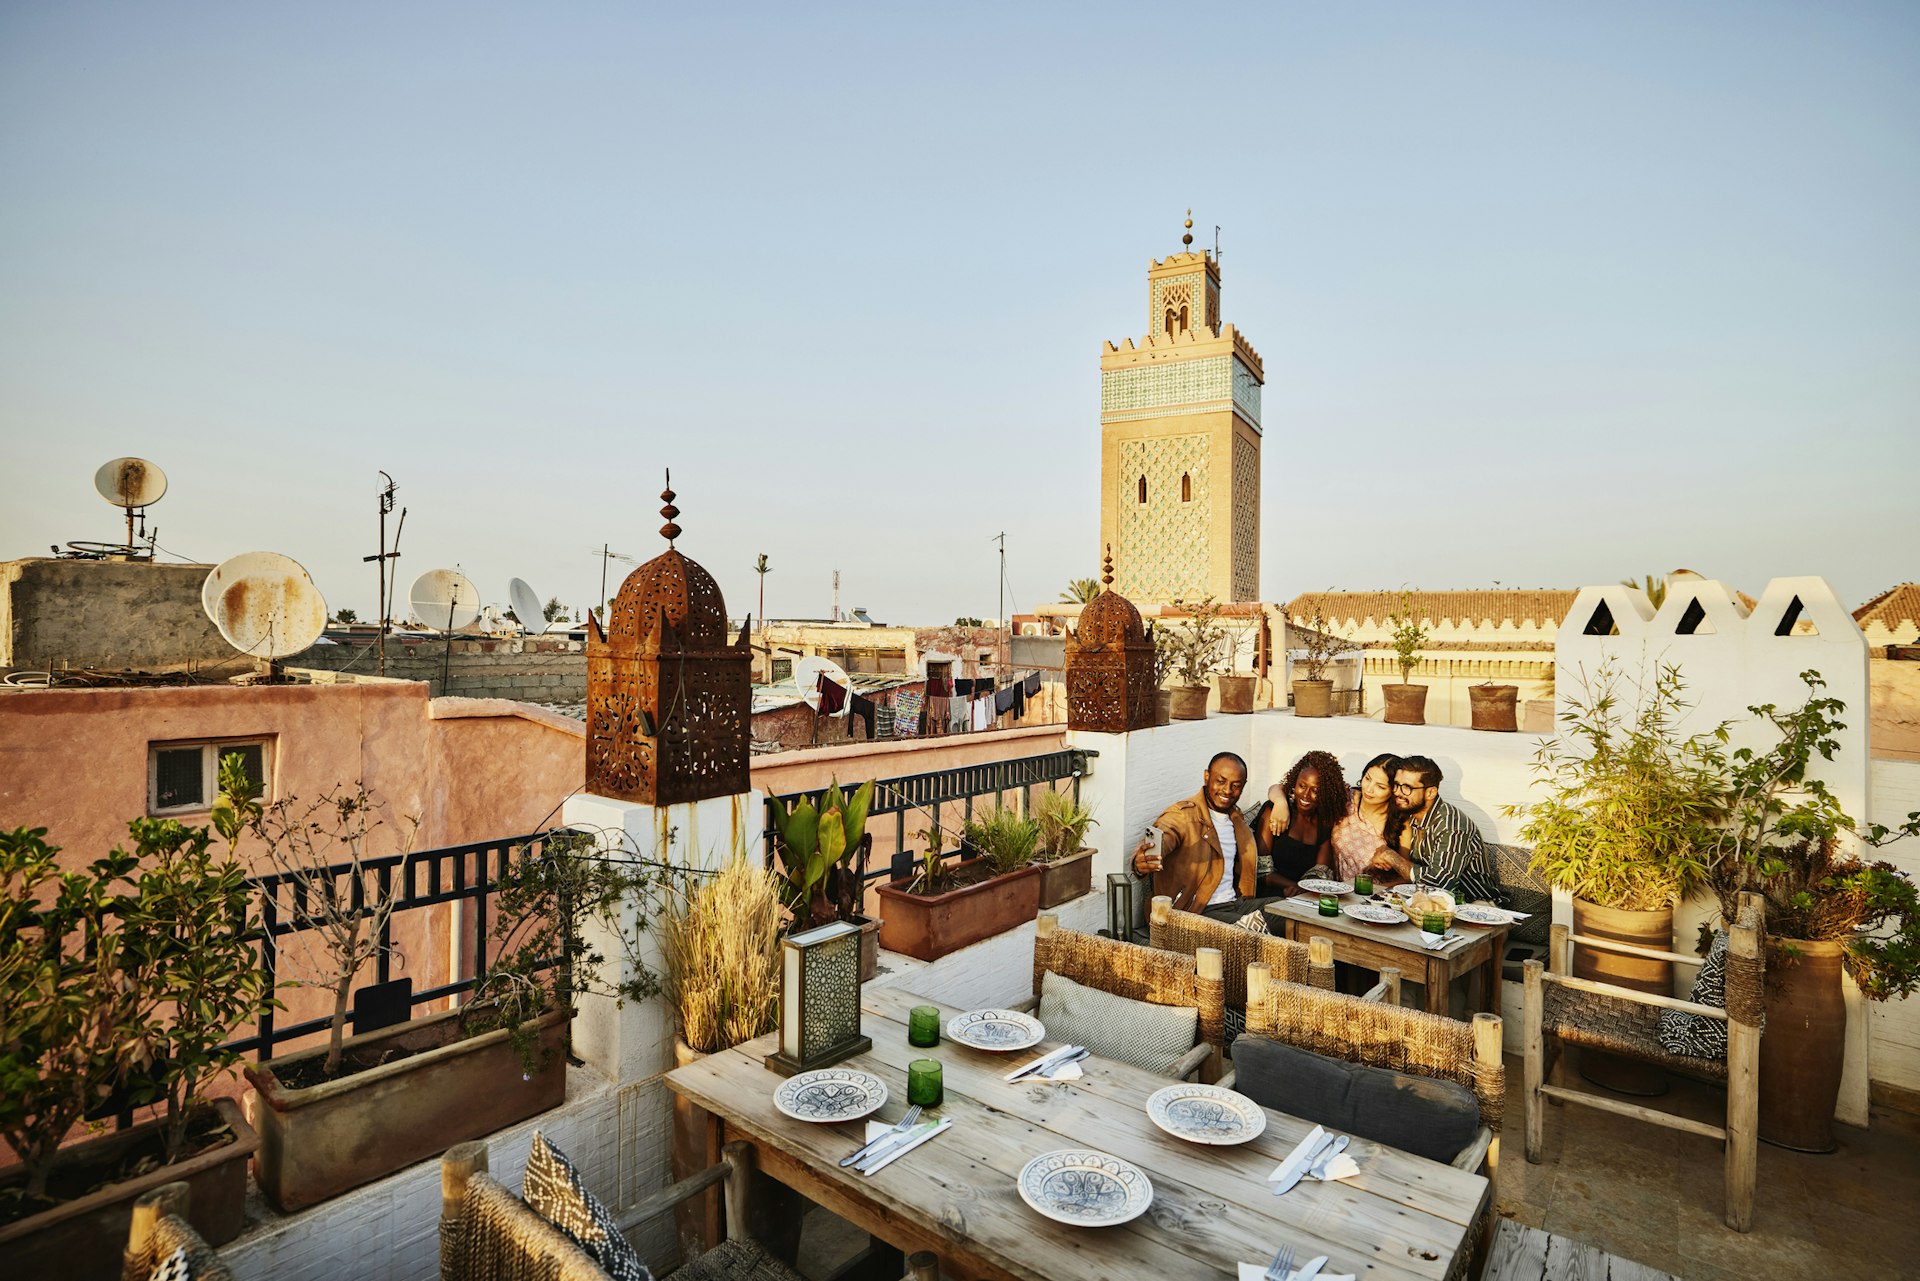 Diners in the sunshine at a rooftop restaurant in Marrakesh, Morocco